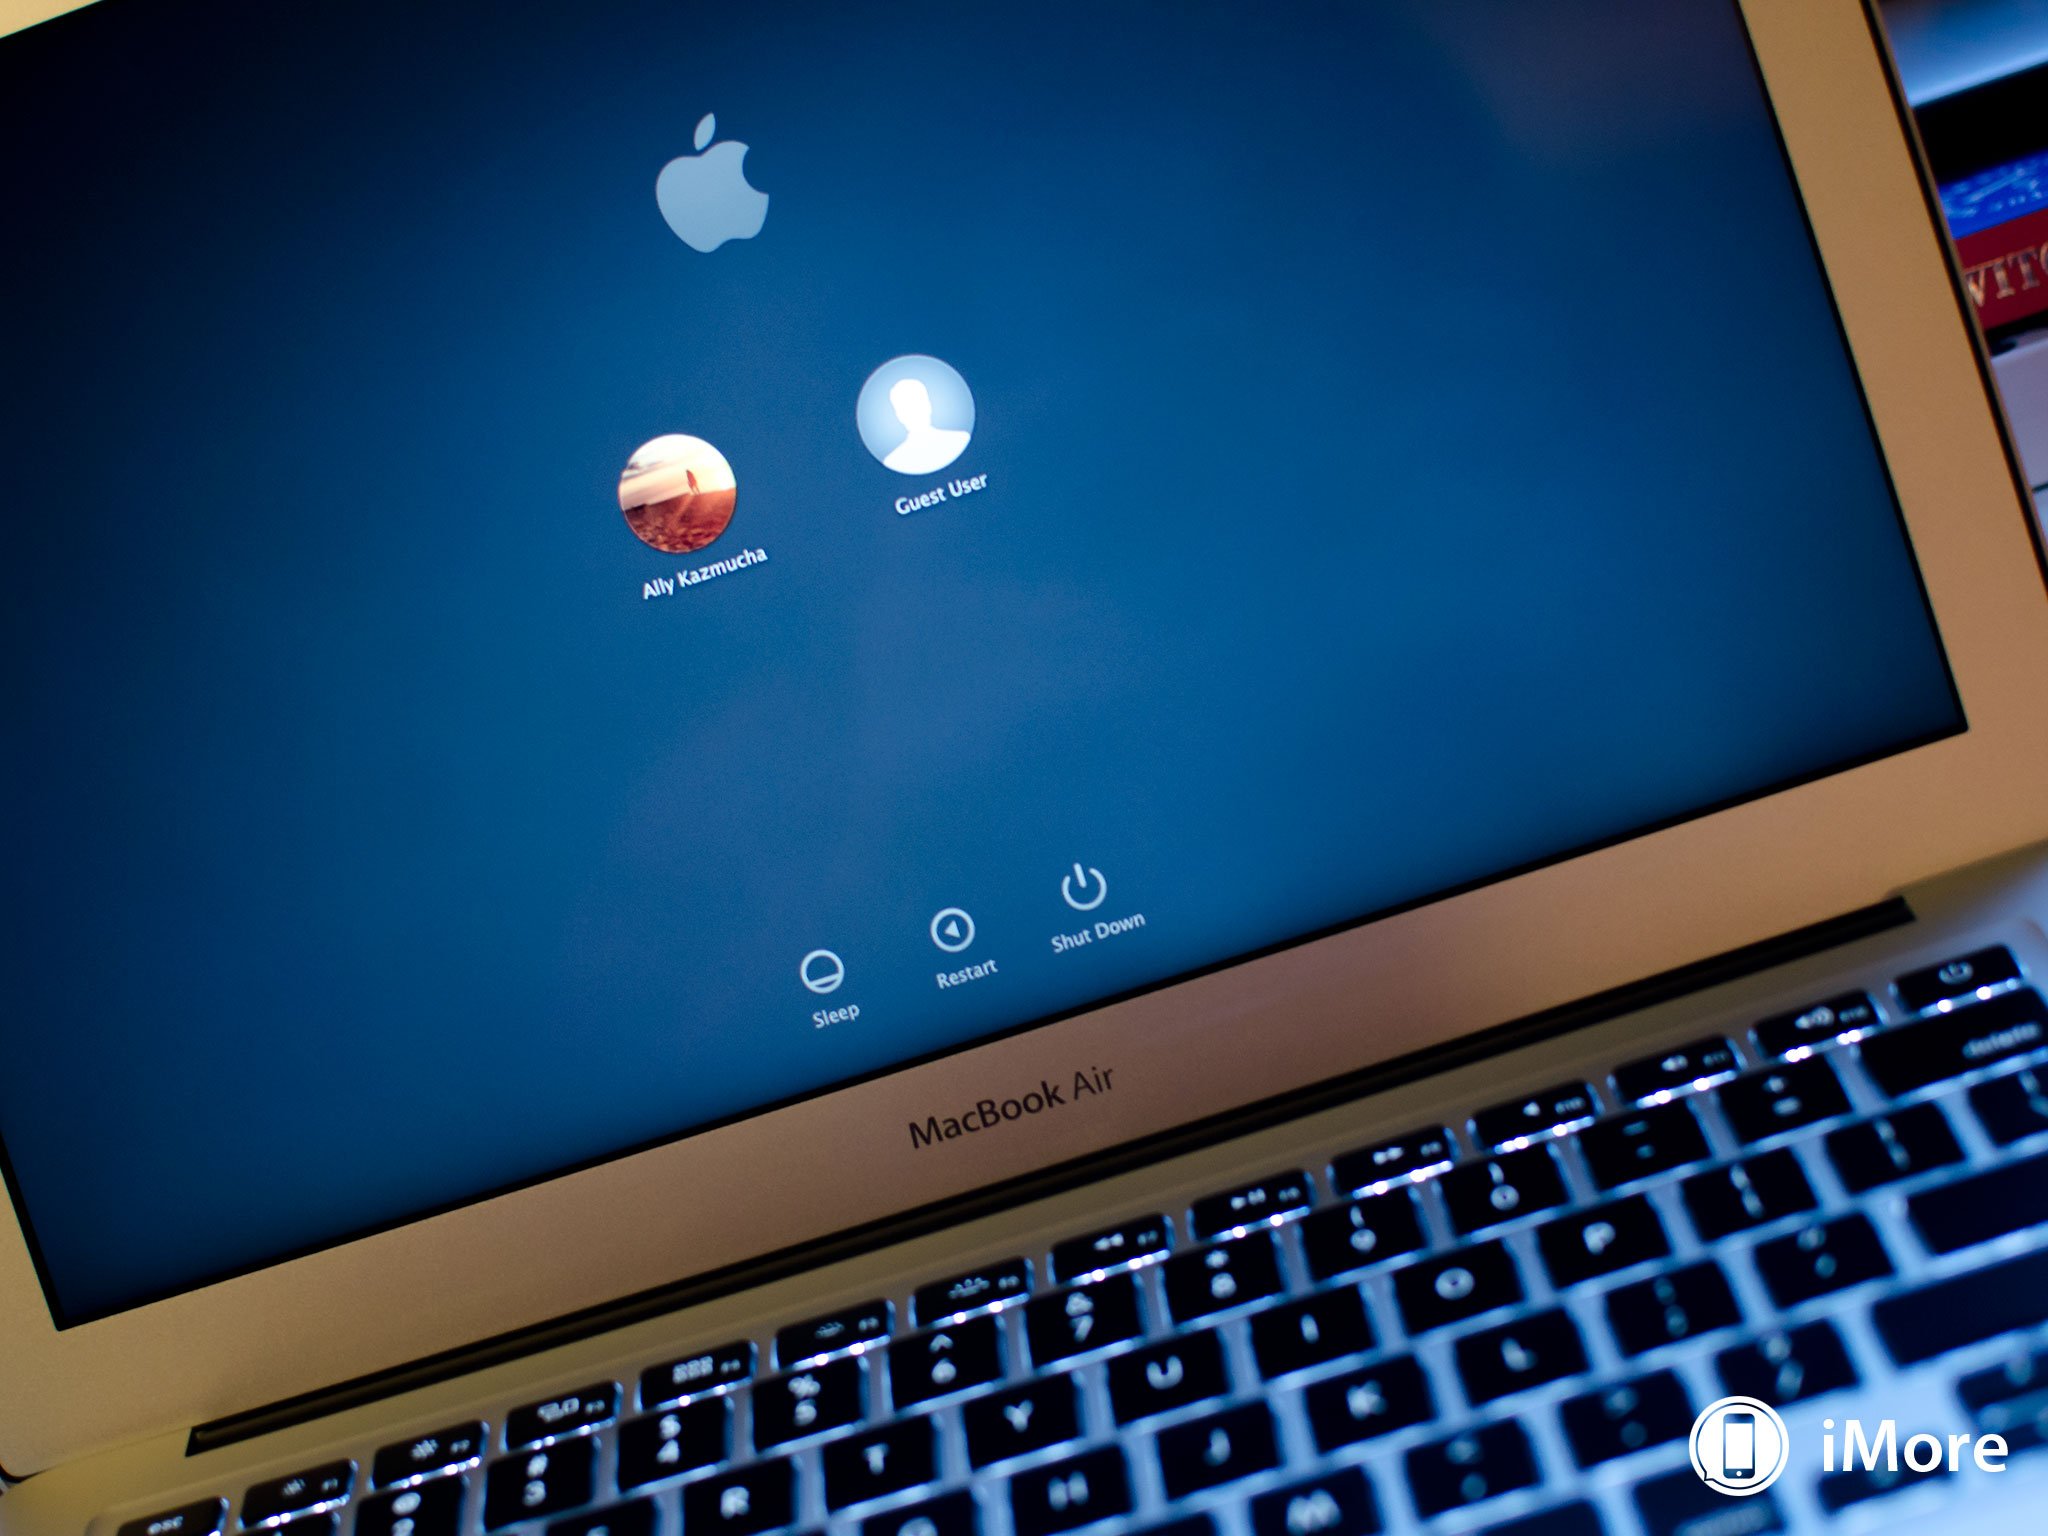 How to enable the Guest User account on your Mac